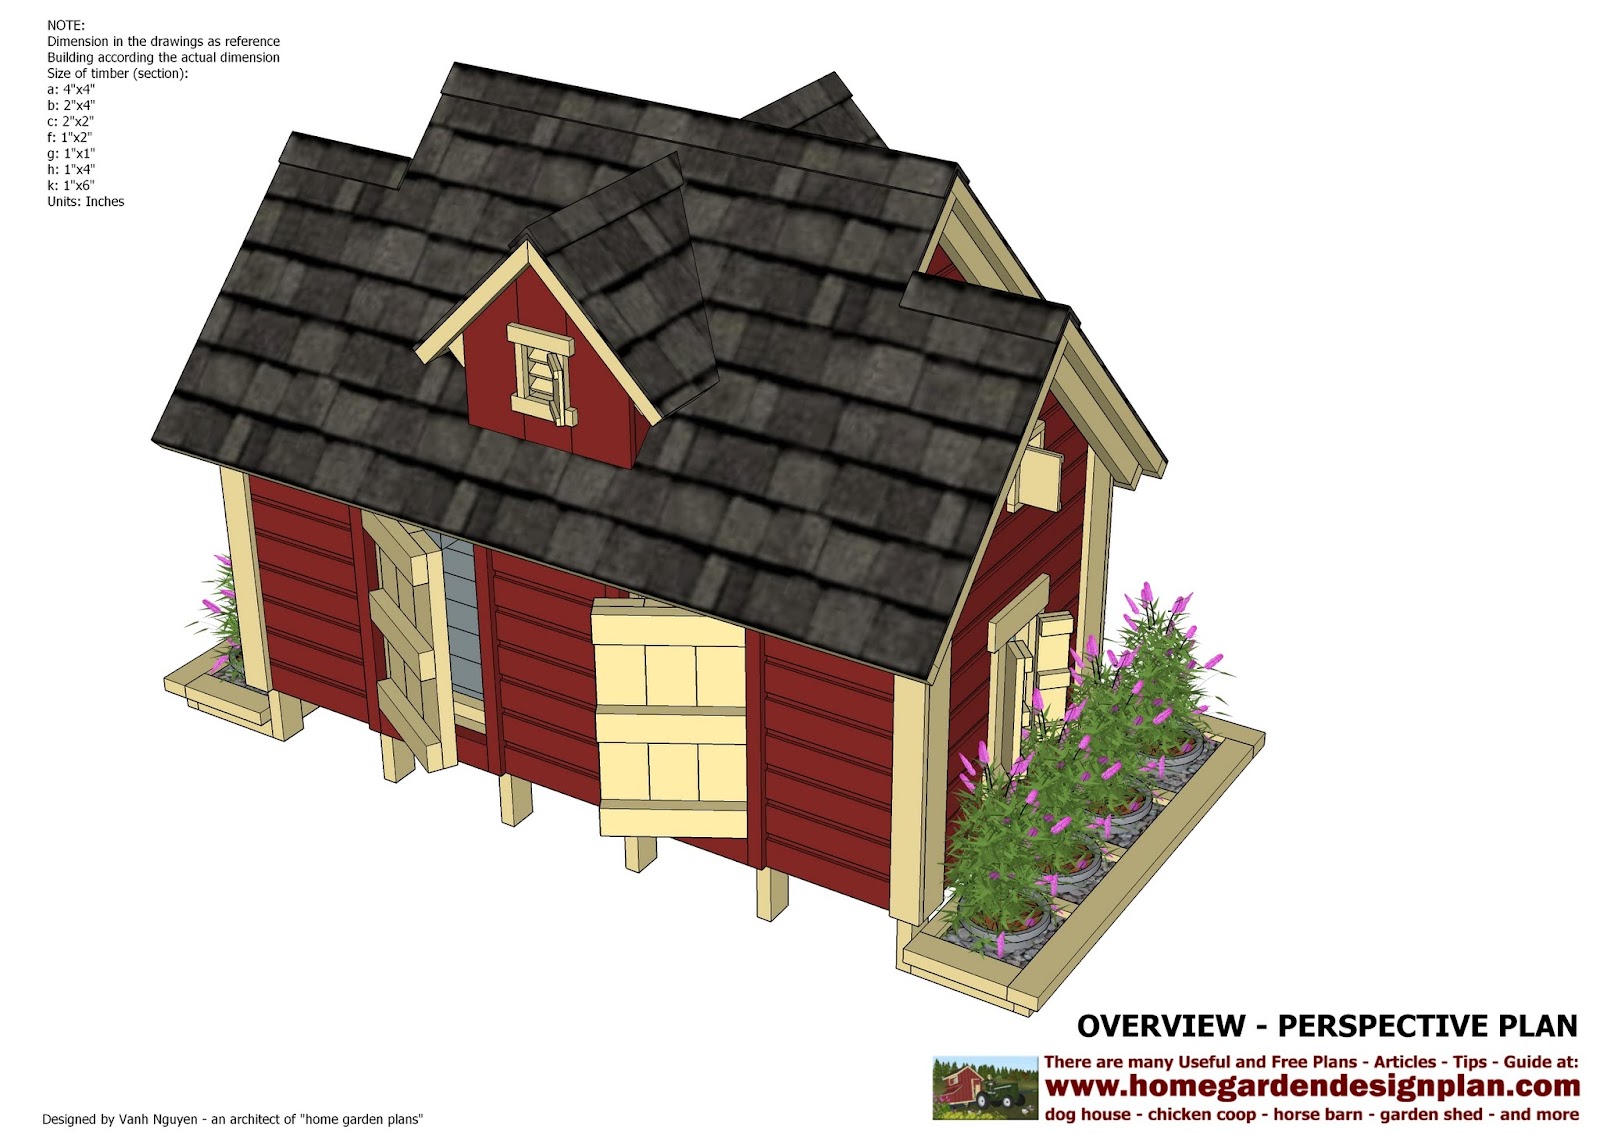 Insulated dog house plans pdf,buy sheds direct promo code,how to build 